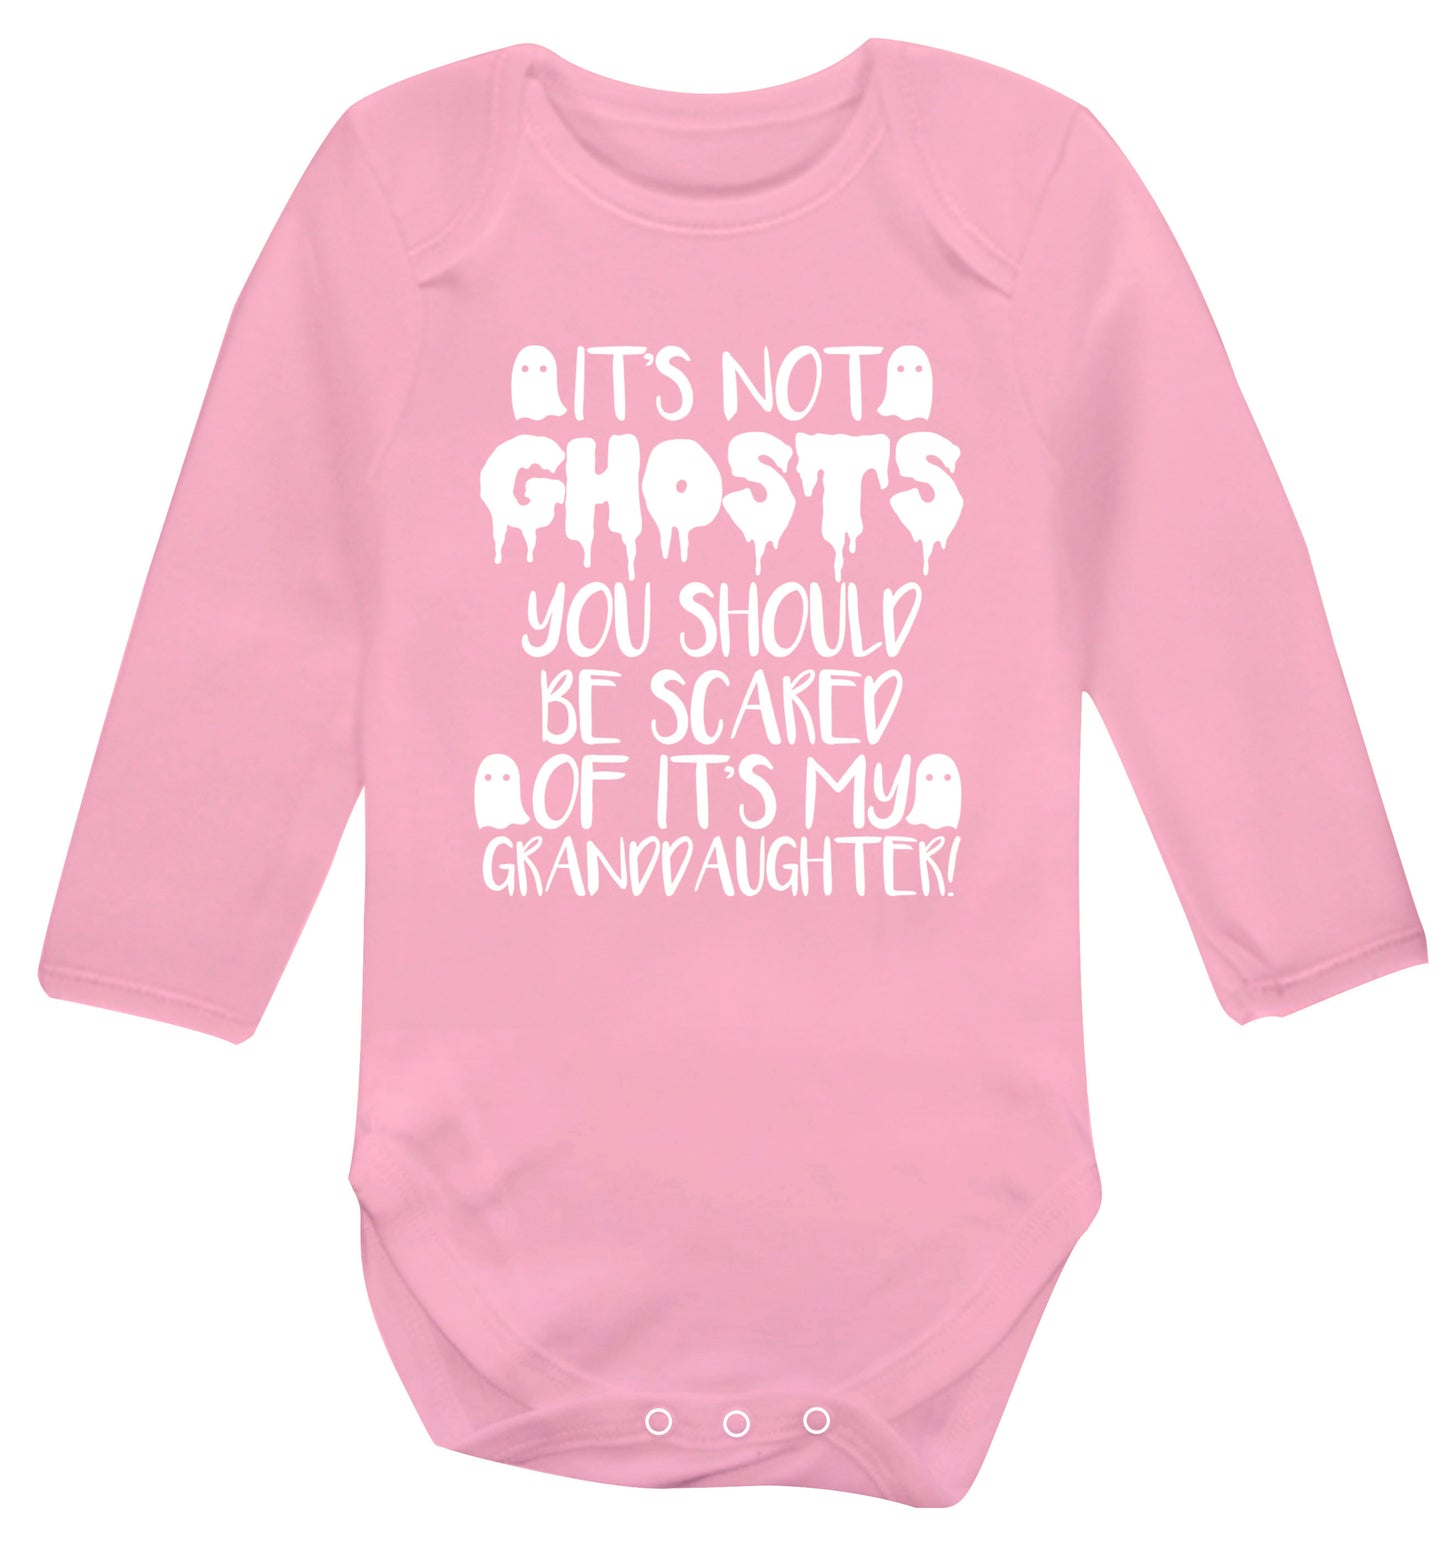 It's not ghosts you should be scared of it's my granddaughter! Baby Vest long sleeved pale pink 6-12 months